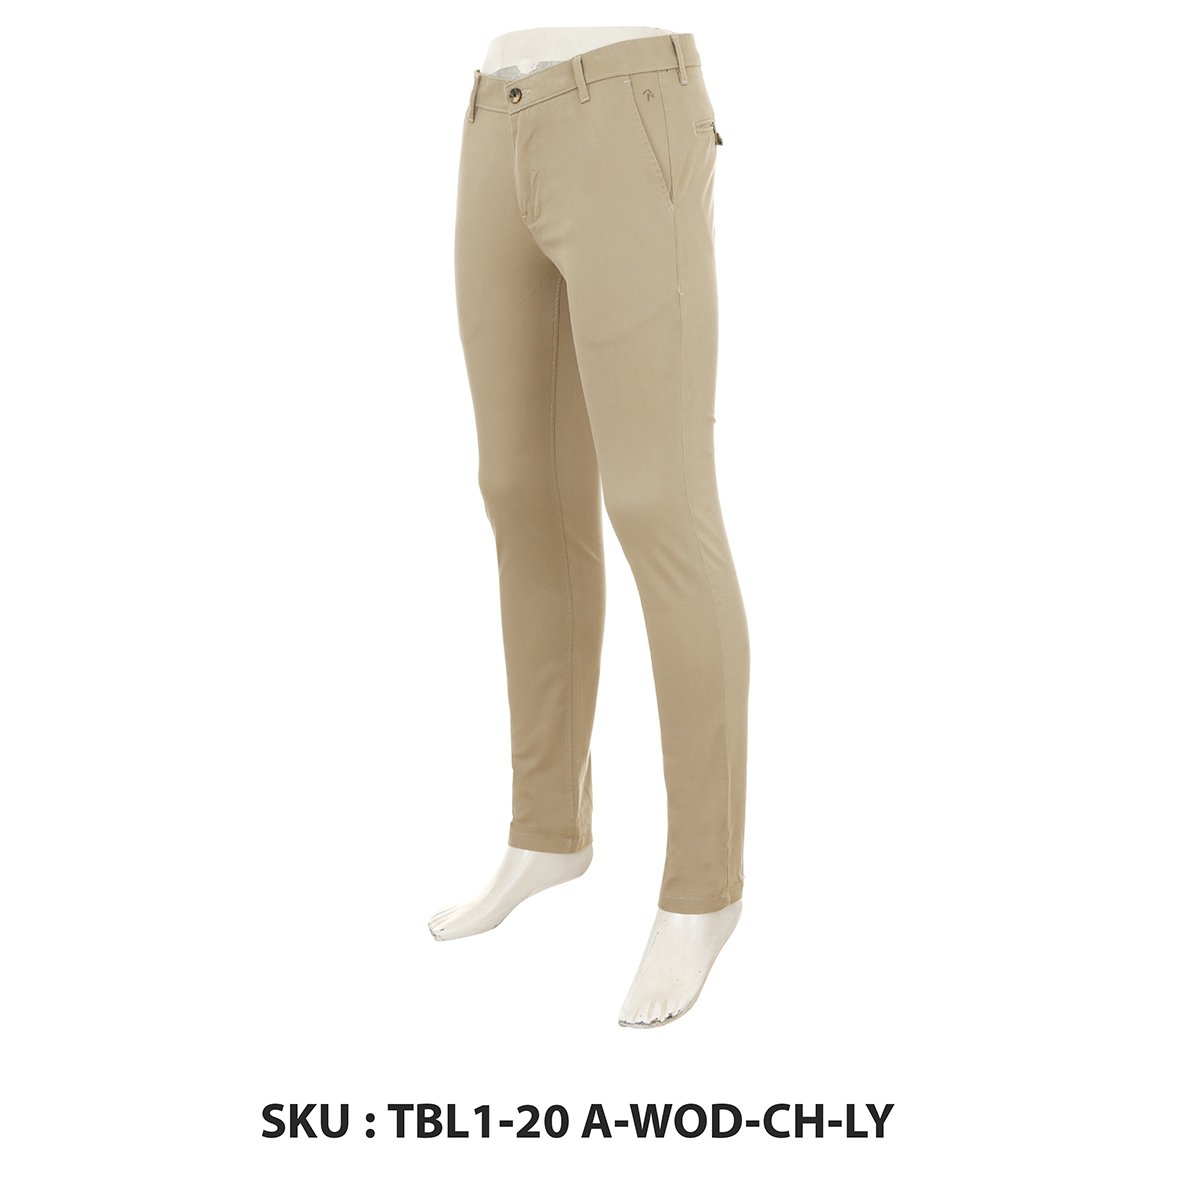 Classic Polo Mens Trousers Tbl1-20 A-Wod-Ch-Ly Wood 42